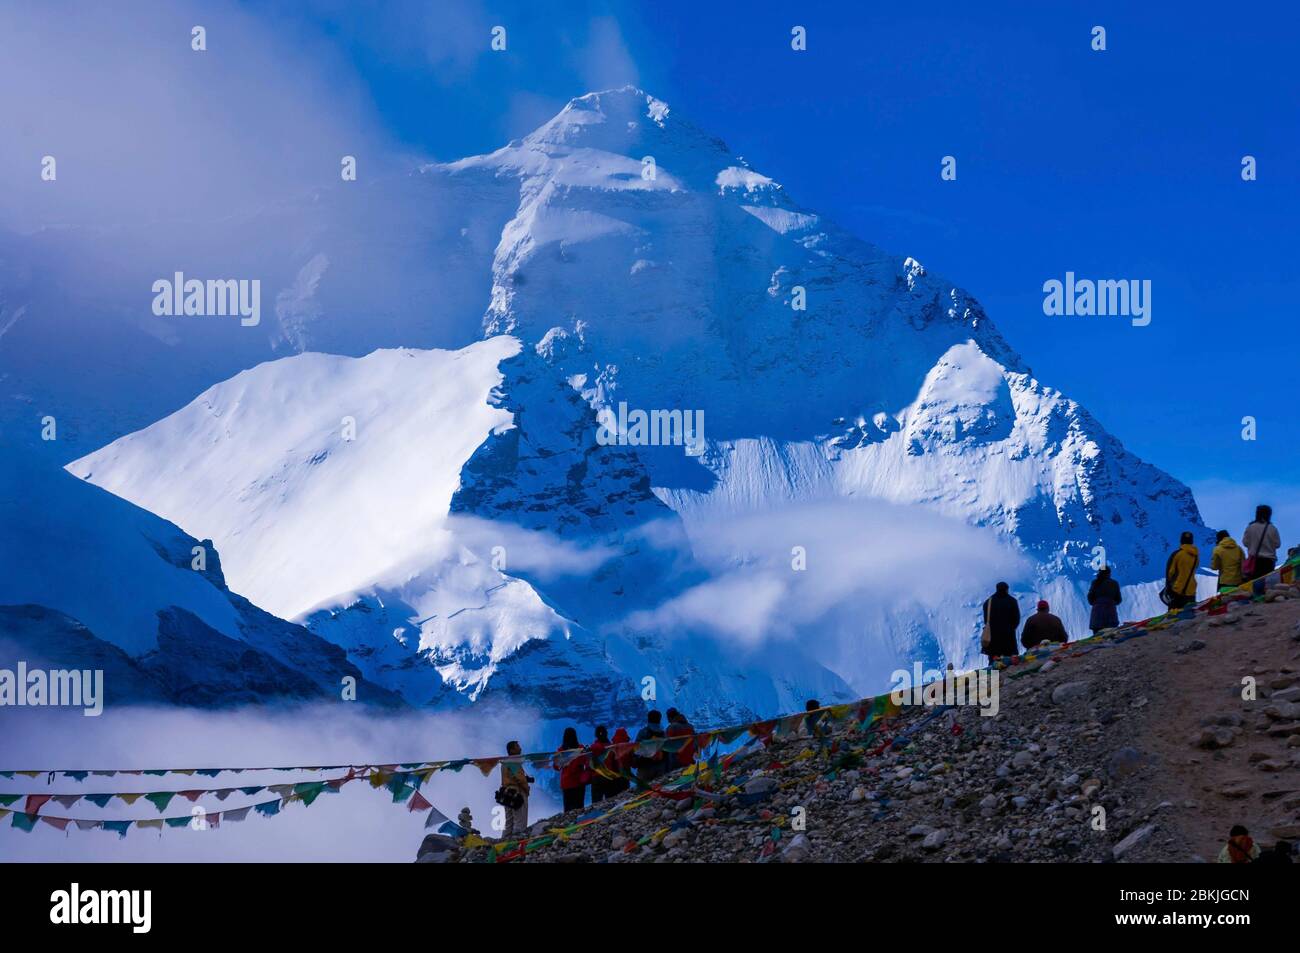 China, Central Tibet, Ü Tsang, Qomolangma National Nature Preserve or Chomolungma Nature Reserve, Everest from its Base Camp Stock Photo